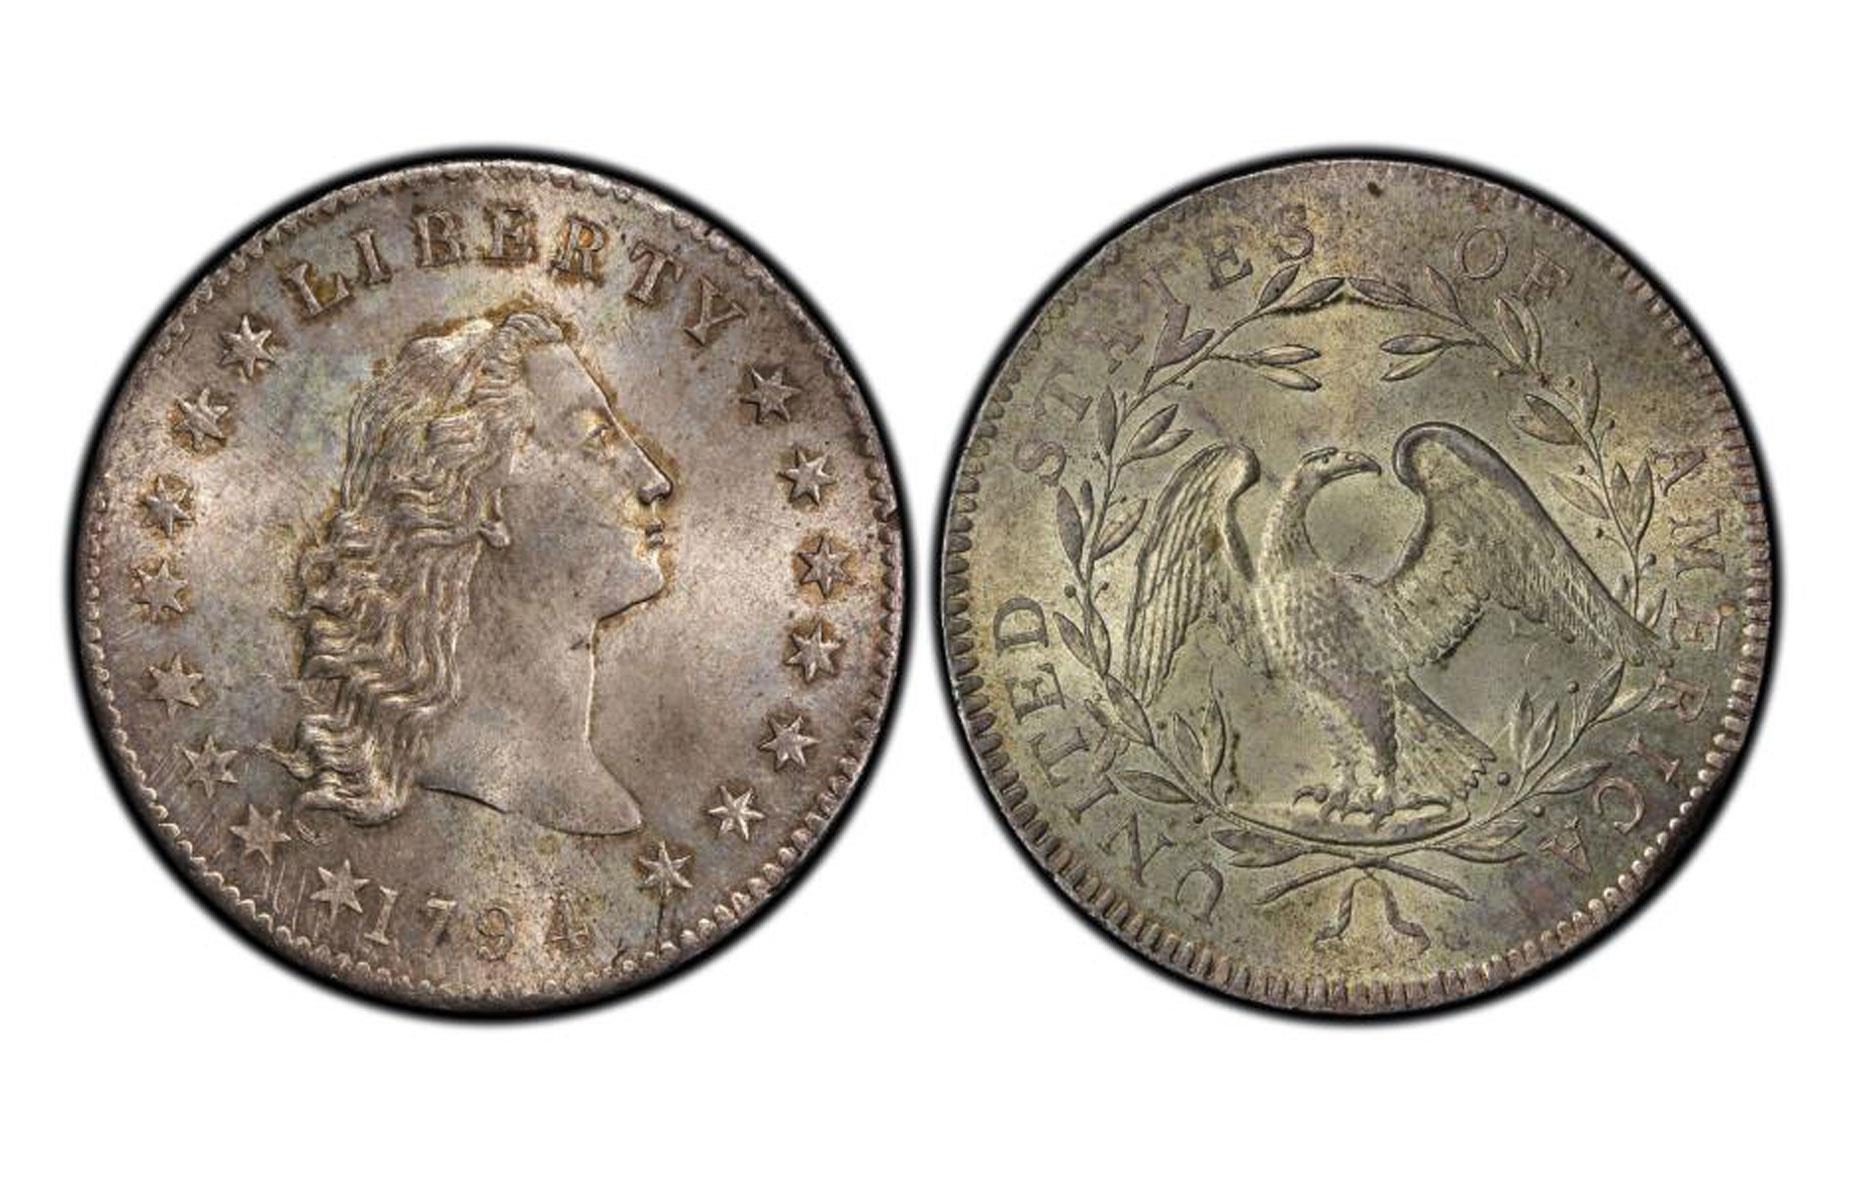 1794 Lord St Oswald-Norweb Flowing Hair dollar coin: $5 million